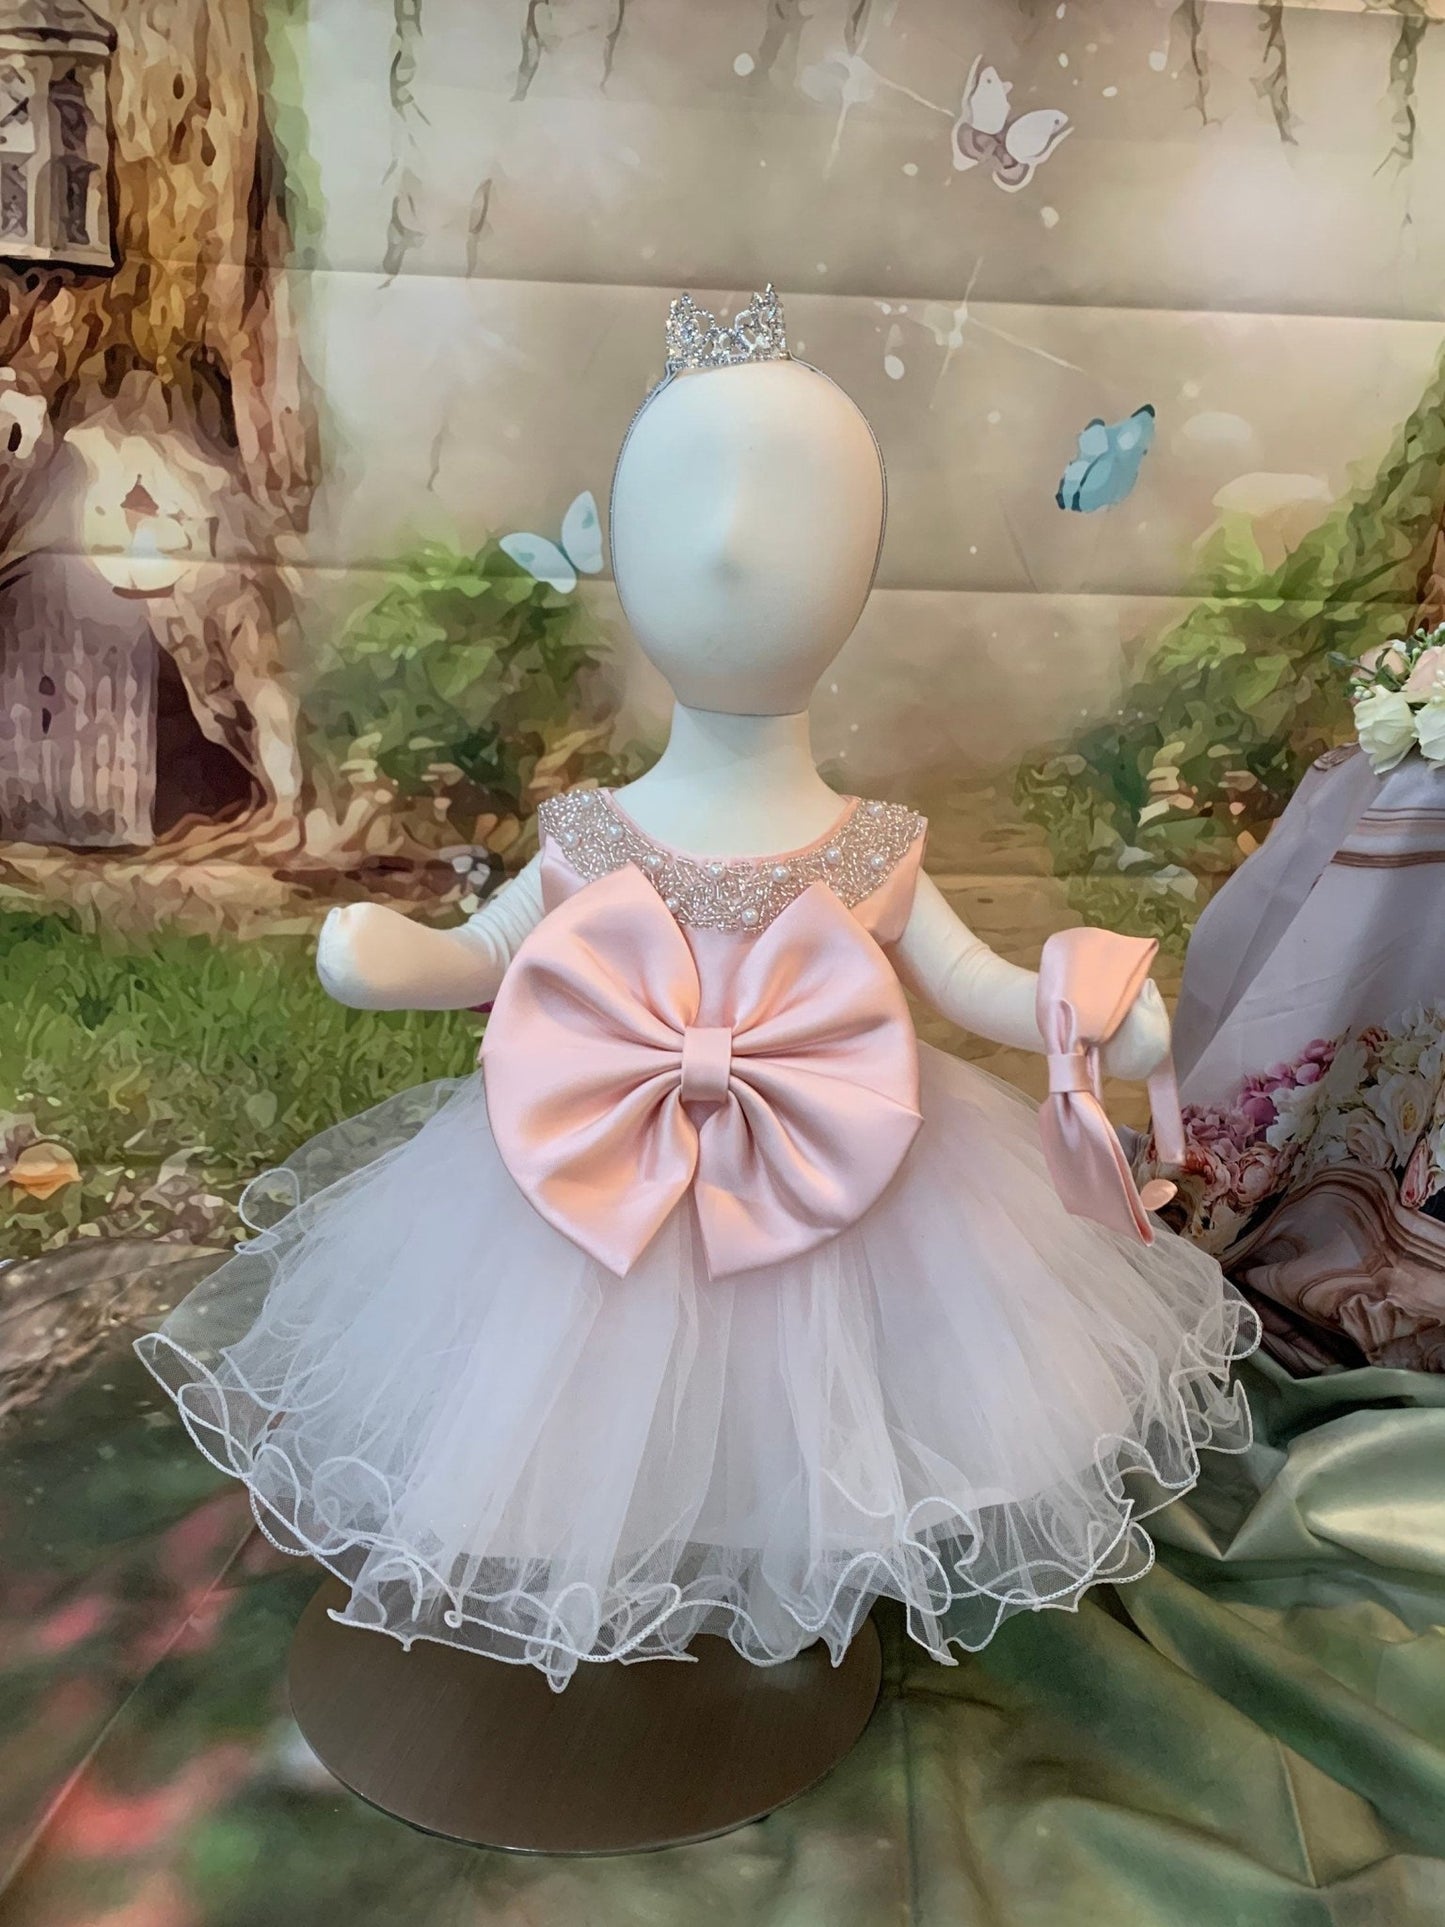 Baby Girl White and Pink Gorgeous Tutu and Lace Dress 6-9 months - TinySweetPeaBoutique